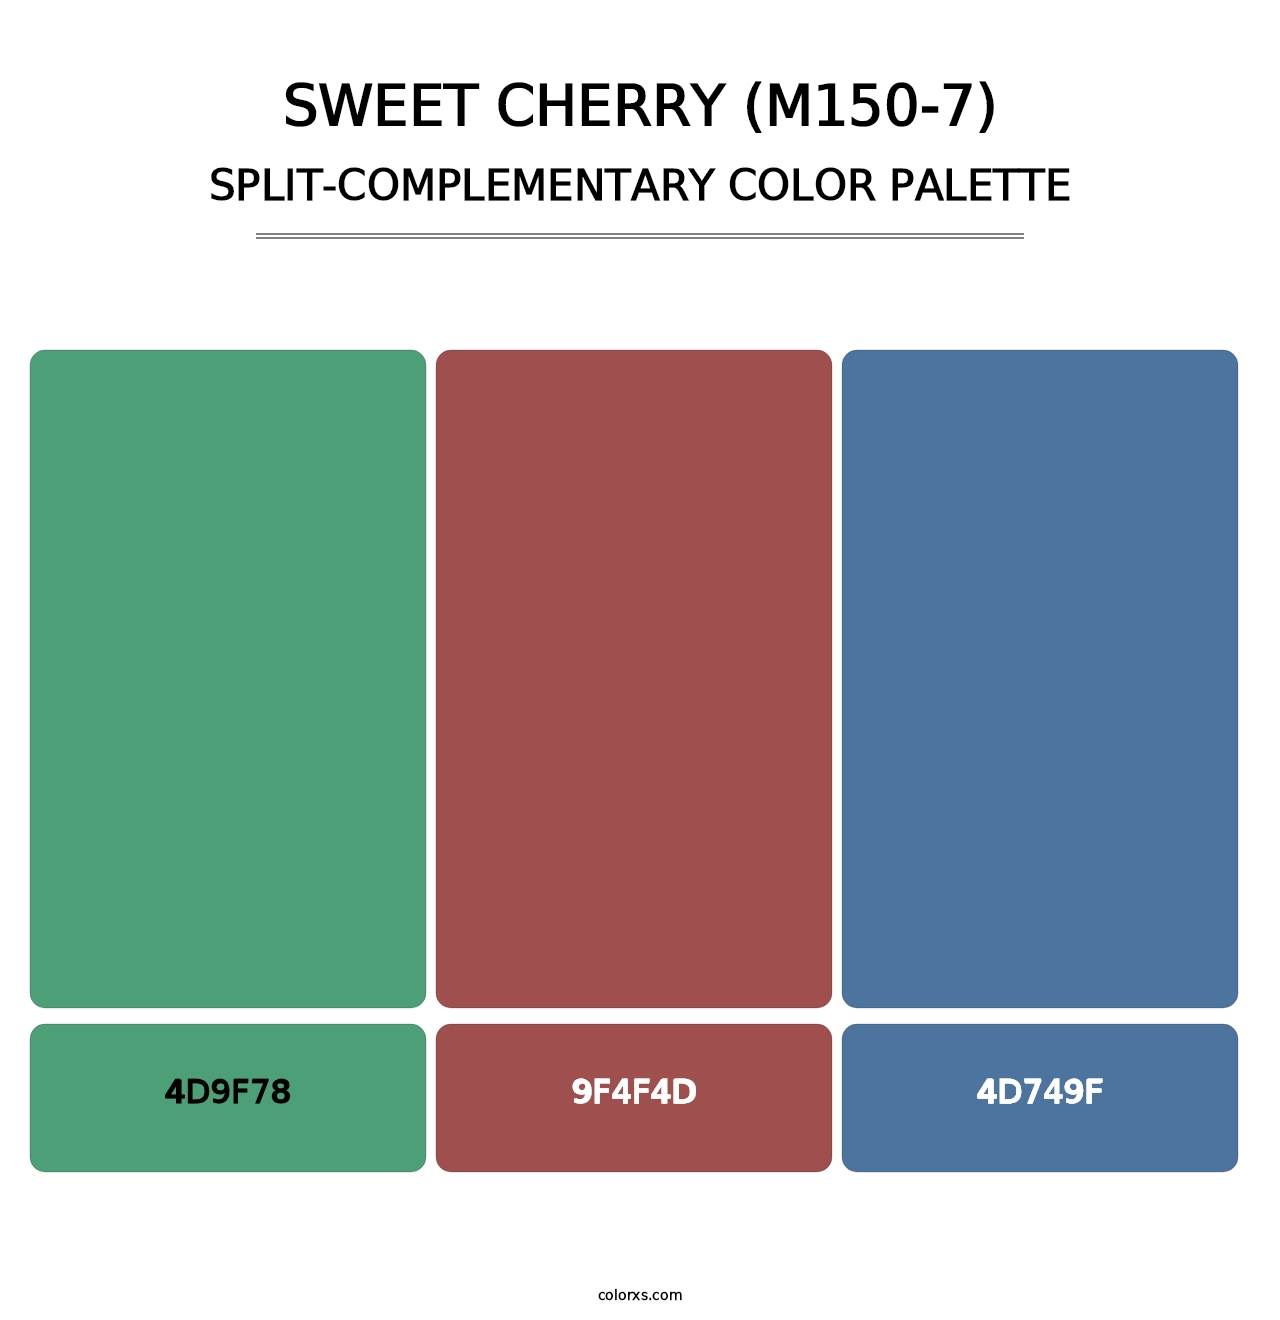 Sweet Cherry (M150-7) - Split-Complementary Color Palette